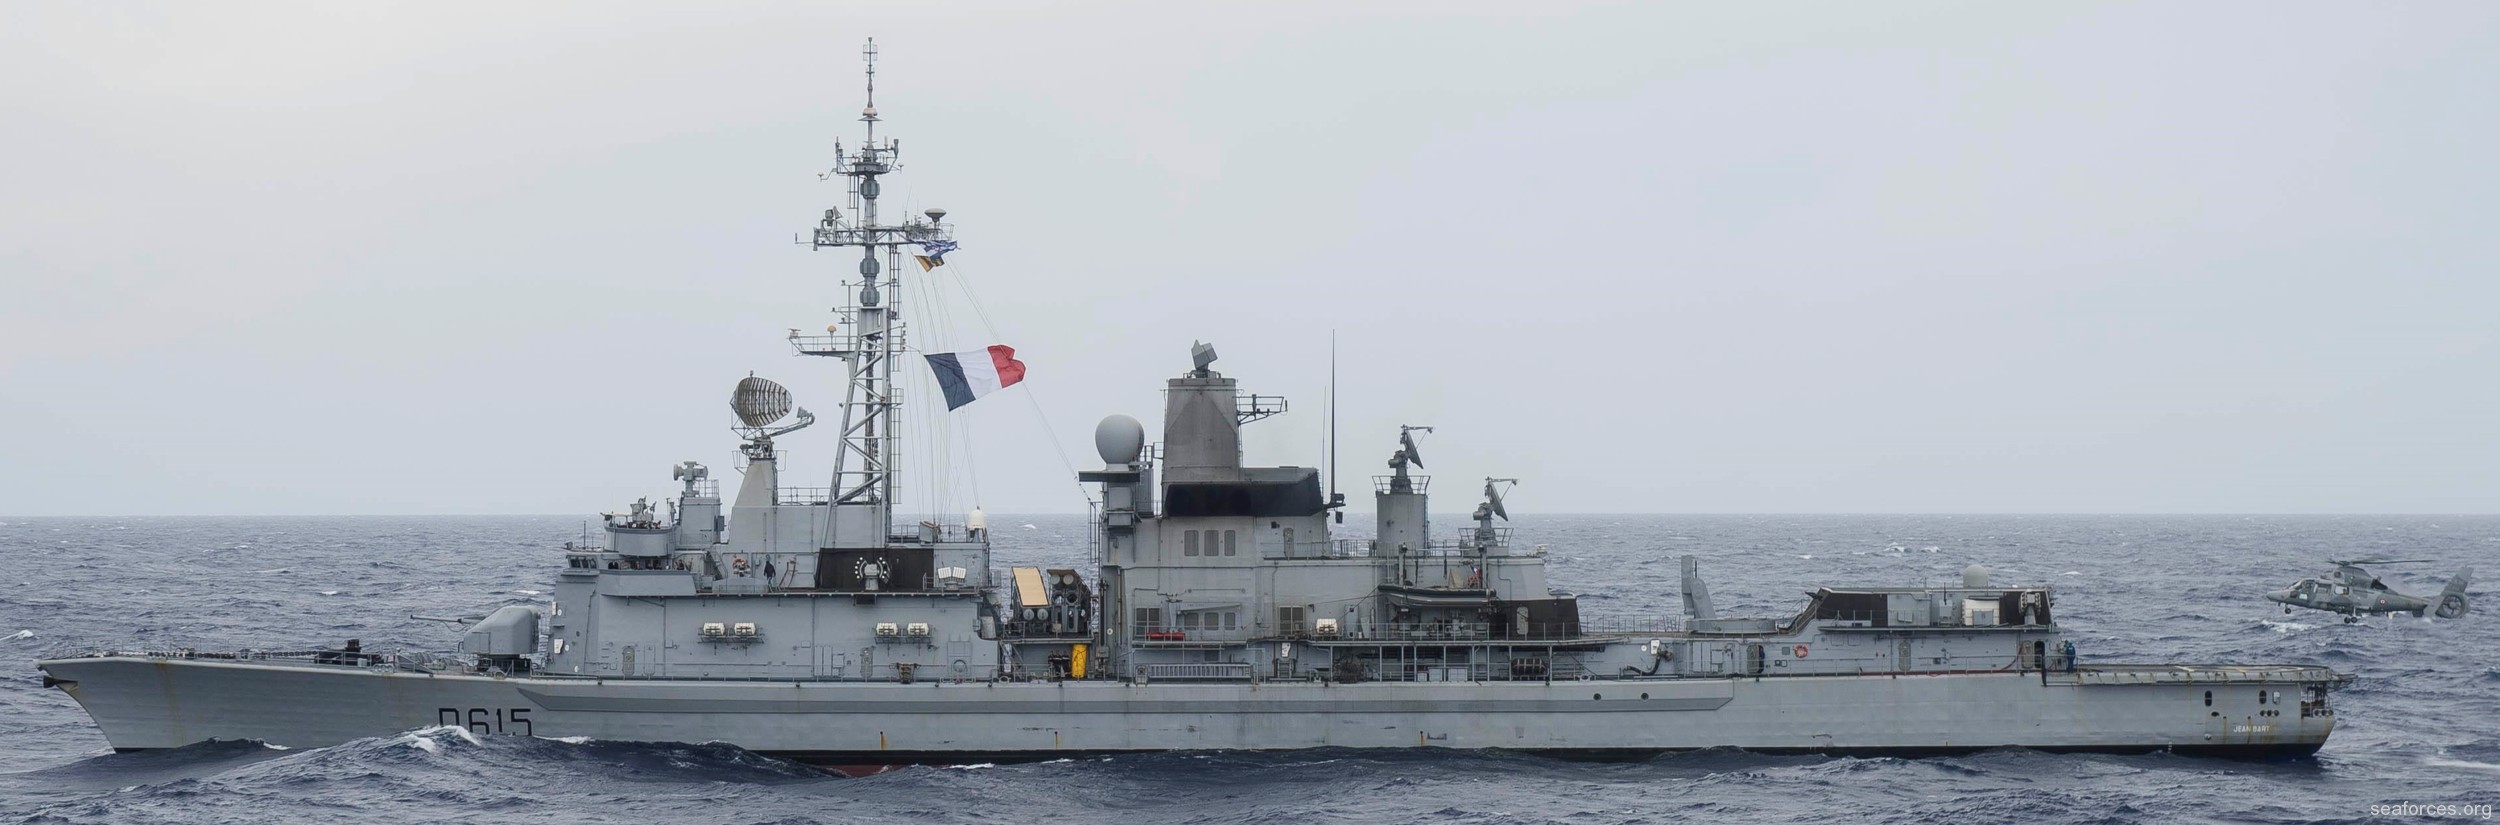 d-615 fs jean bart cassard f70aa class guided missile frigate ffgh ddg french navy marine nationale 07